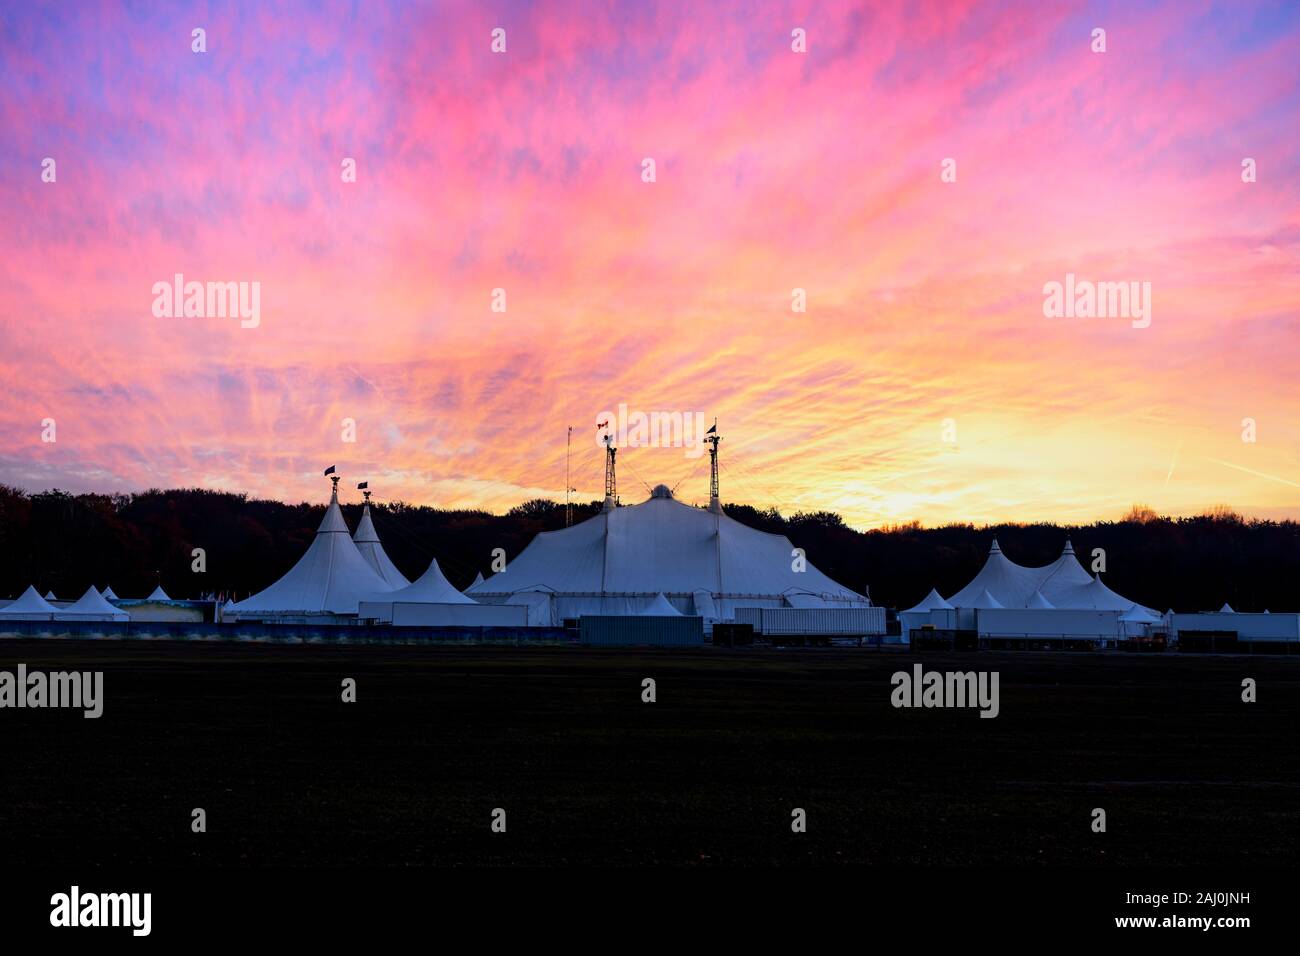 Circus tent under a warn sunset and chaotic sky without the name of the circus company which is cloned out and replaced by the metallic structure Stock Photo